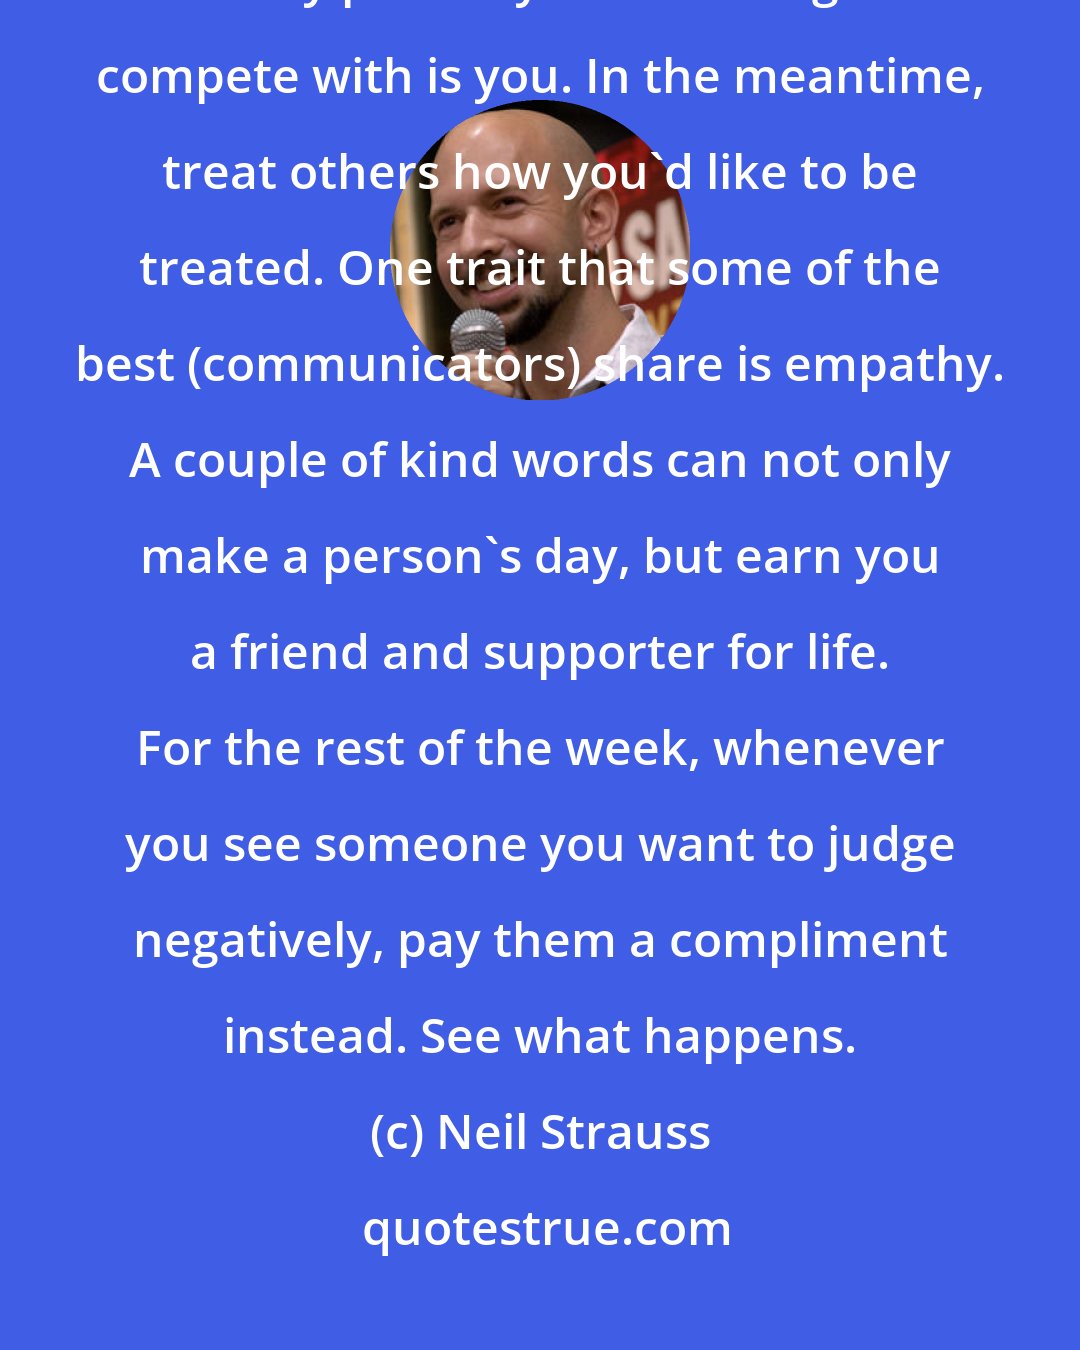 Neil Strauss: Instead of putting others down, try improving yourself instead. The only person you have a right to compete with is you. In the meantime, treat others how you'd like to be treated. One trait that some of the best (communicators) share is empathy. A couple of kind words can not only make a person's day, but earn you a friend and supporter for life. For the rest of the week, whenever you see someone you want to judge negatively, pay them a compliment instead. See what happens.